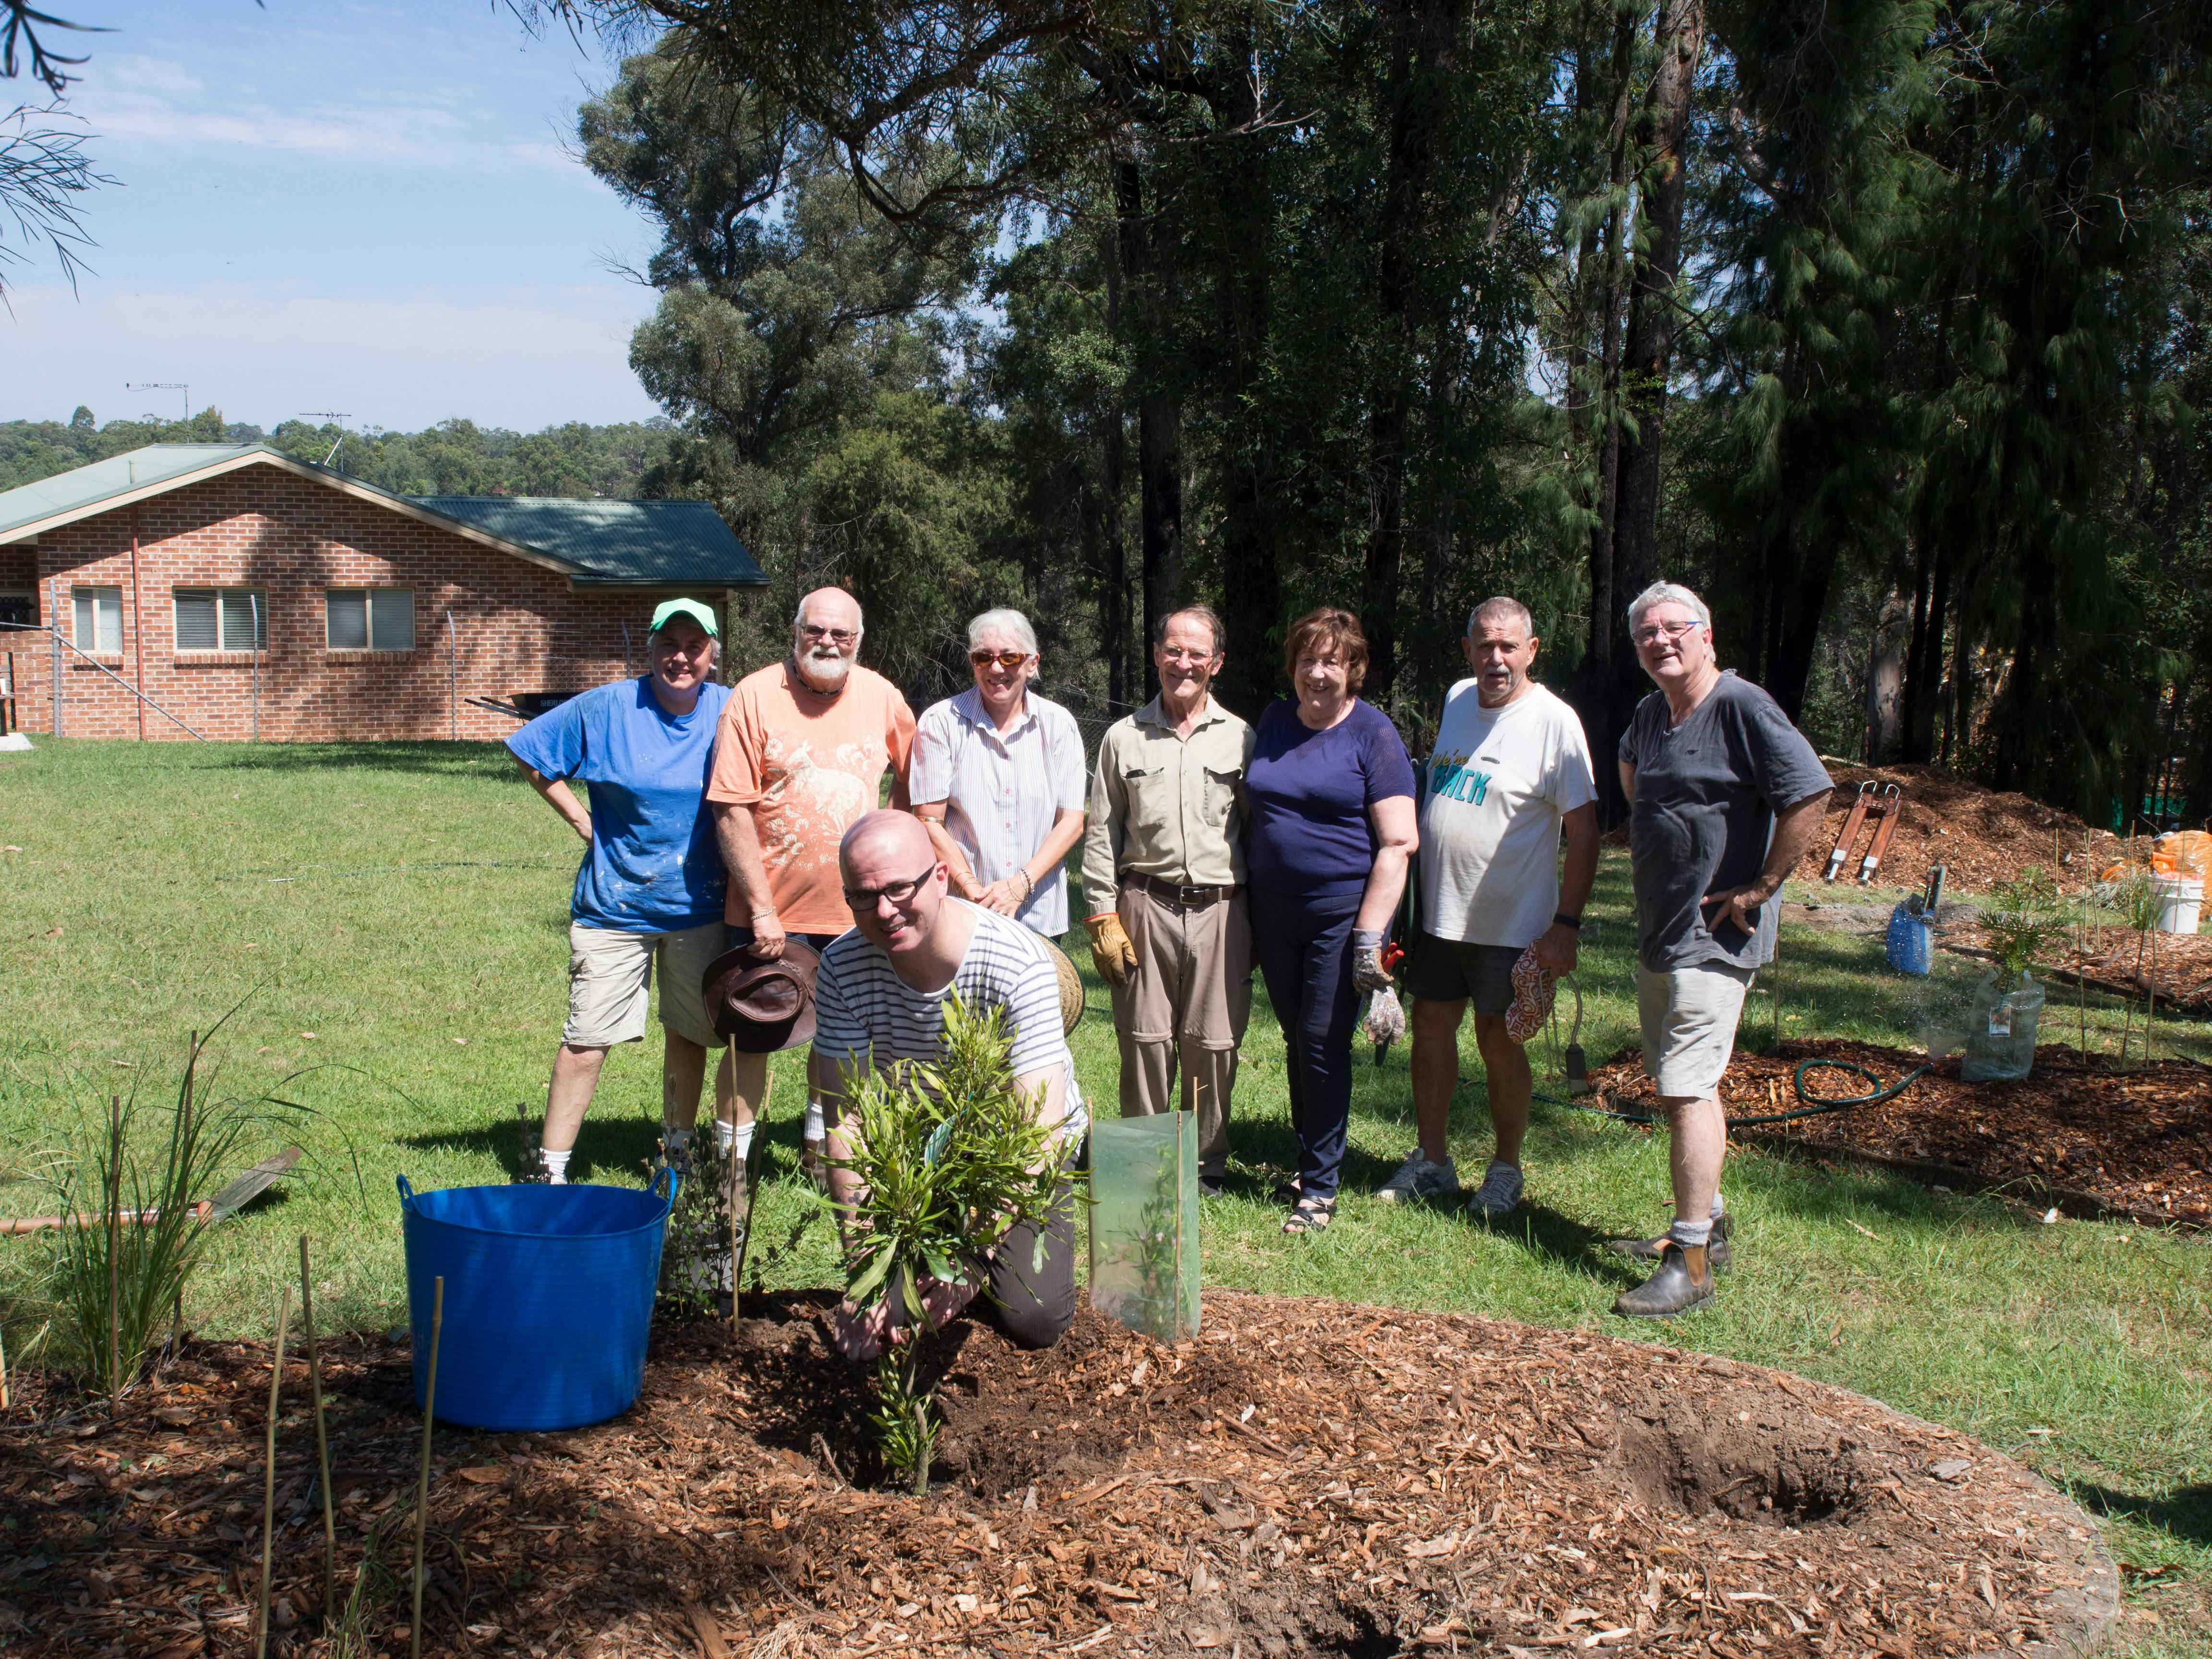 Love the Community Spirit A working bee with local residents at the Emma Pde park, which was badly damaged after the 2013 bushfires. Mark Greenhill came to plant a tree. Project organised by the As the Smoke Clears project team. 